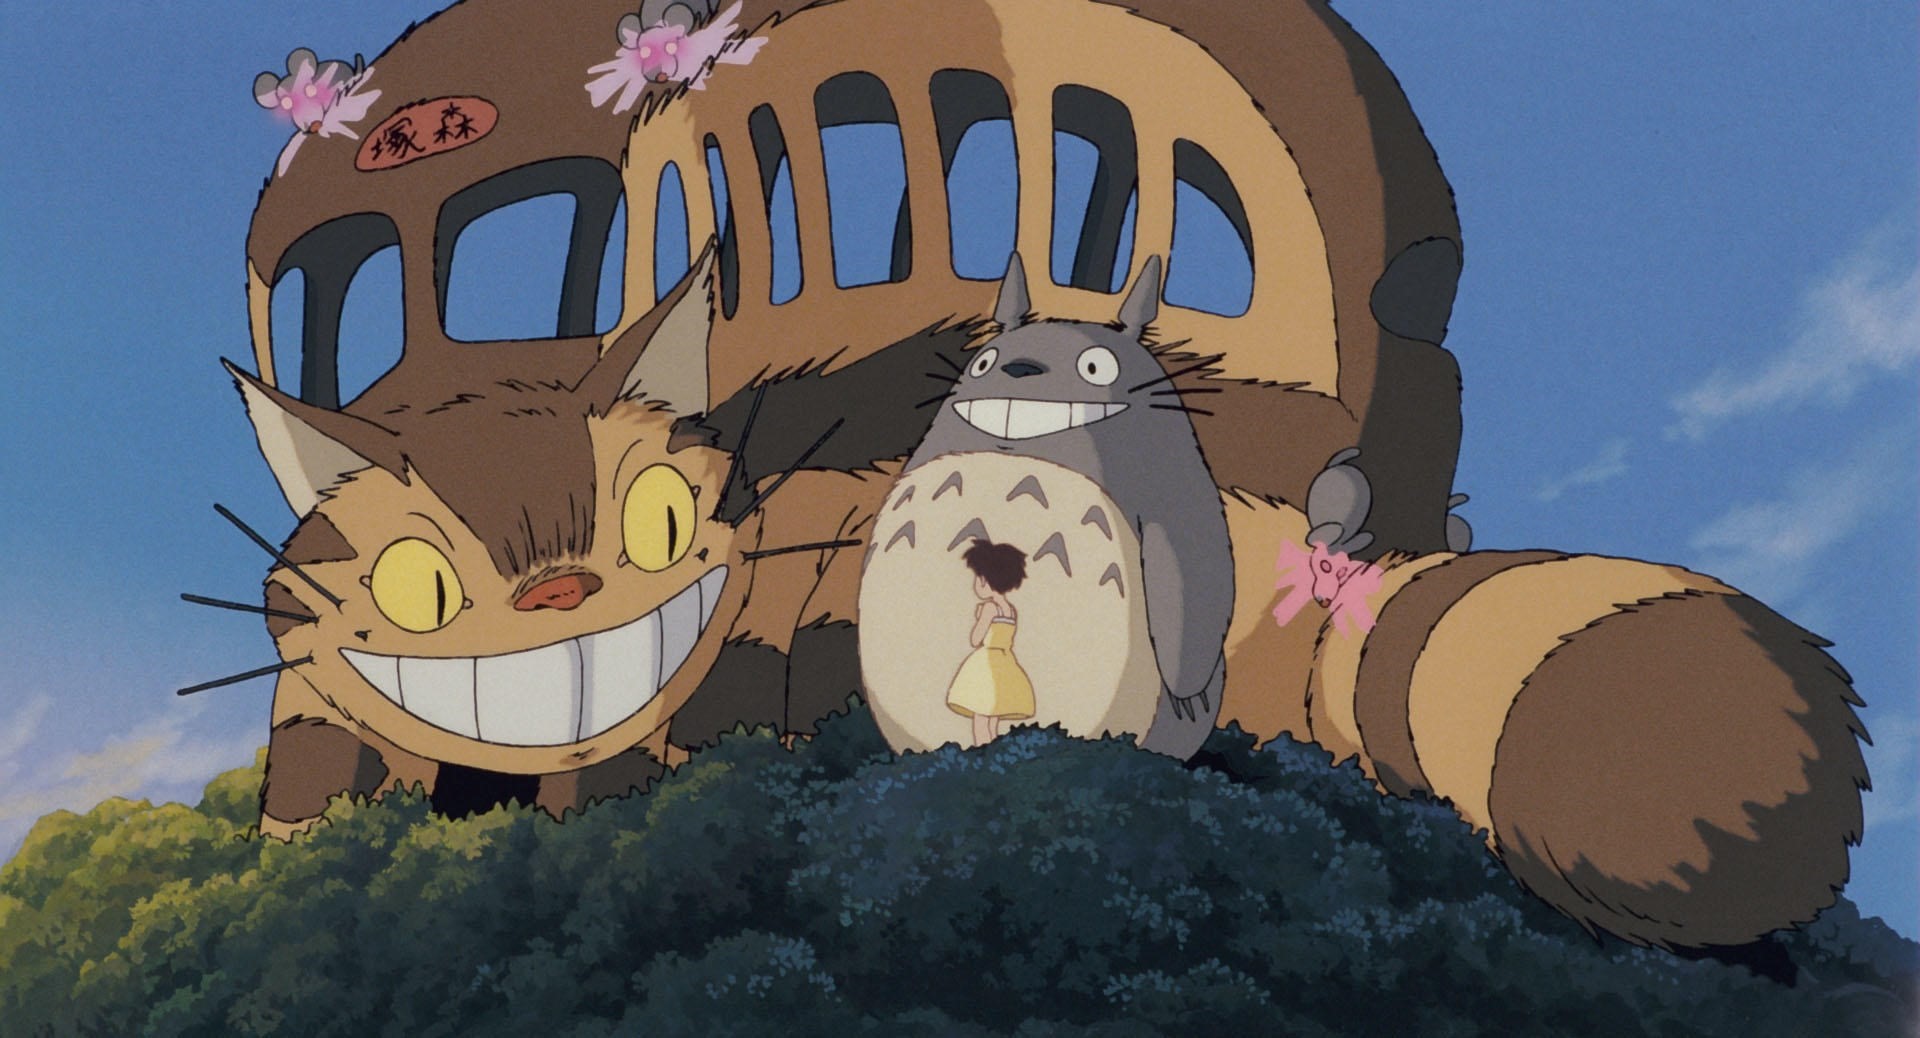 Studio Ghibli shares 250 new images from classic films, including Totoro